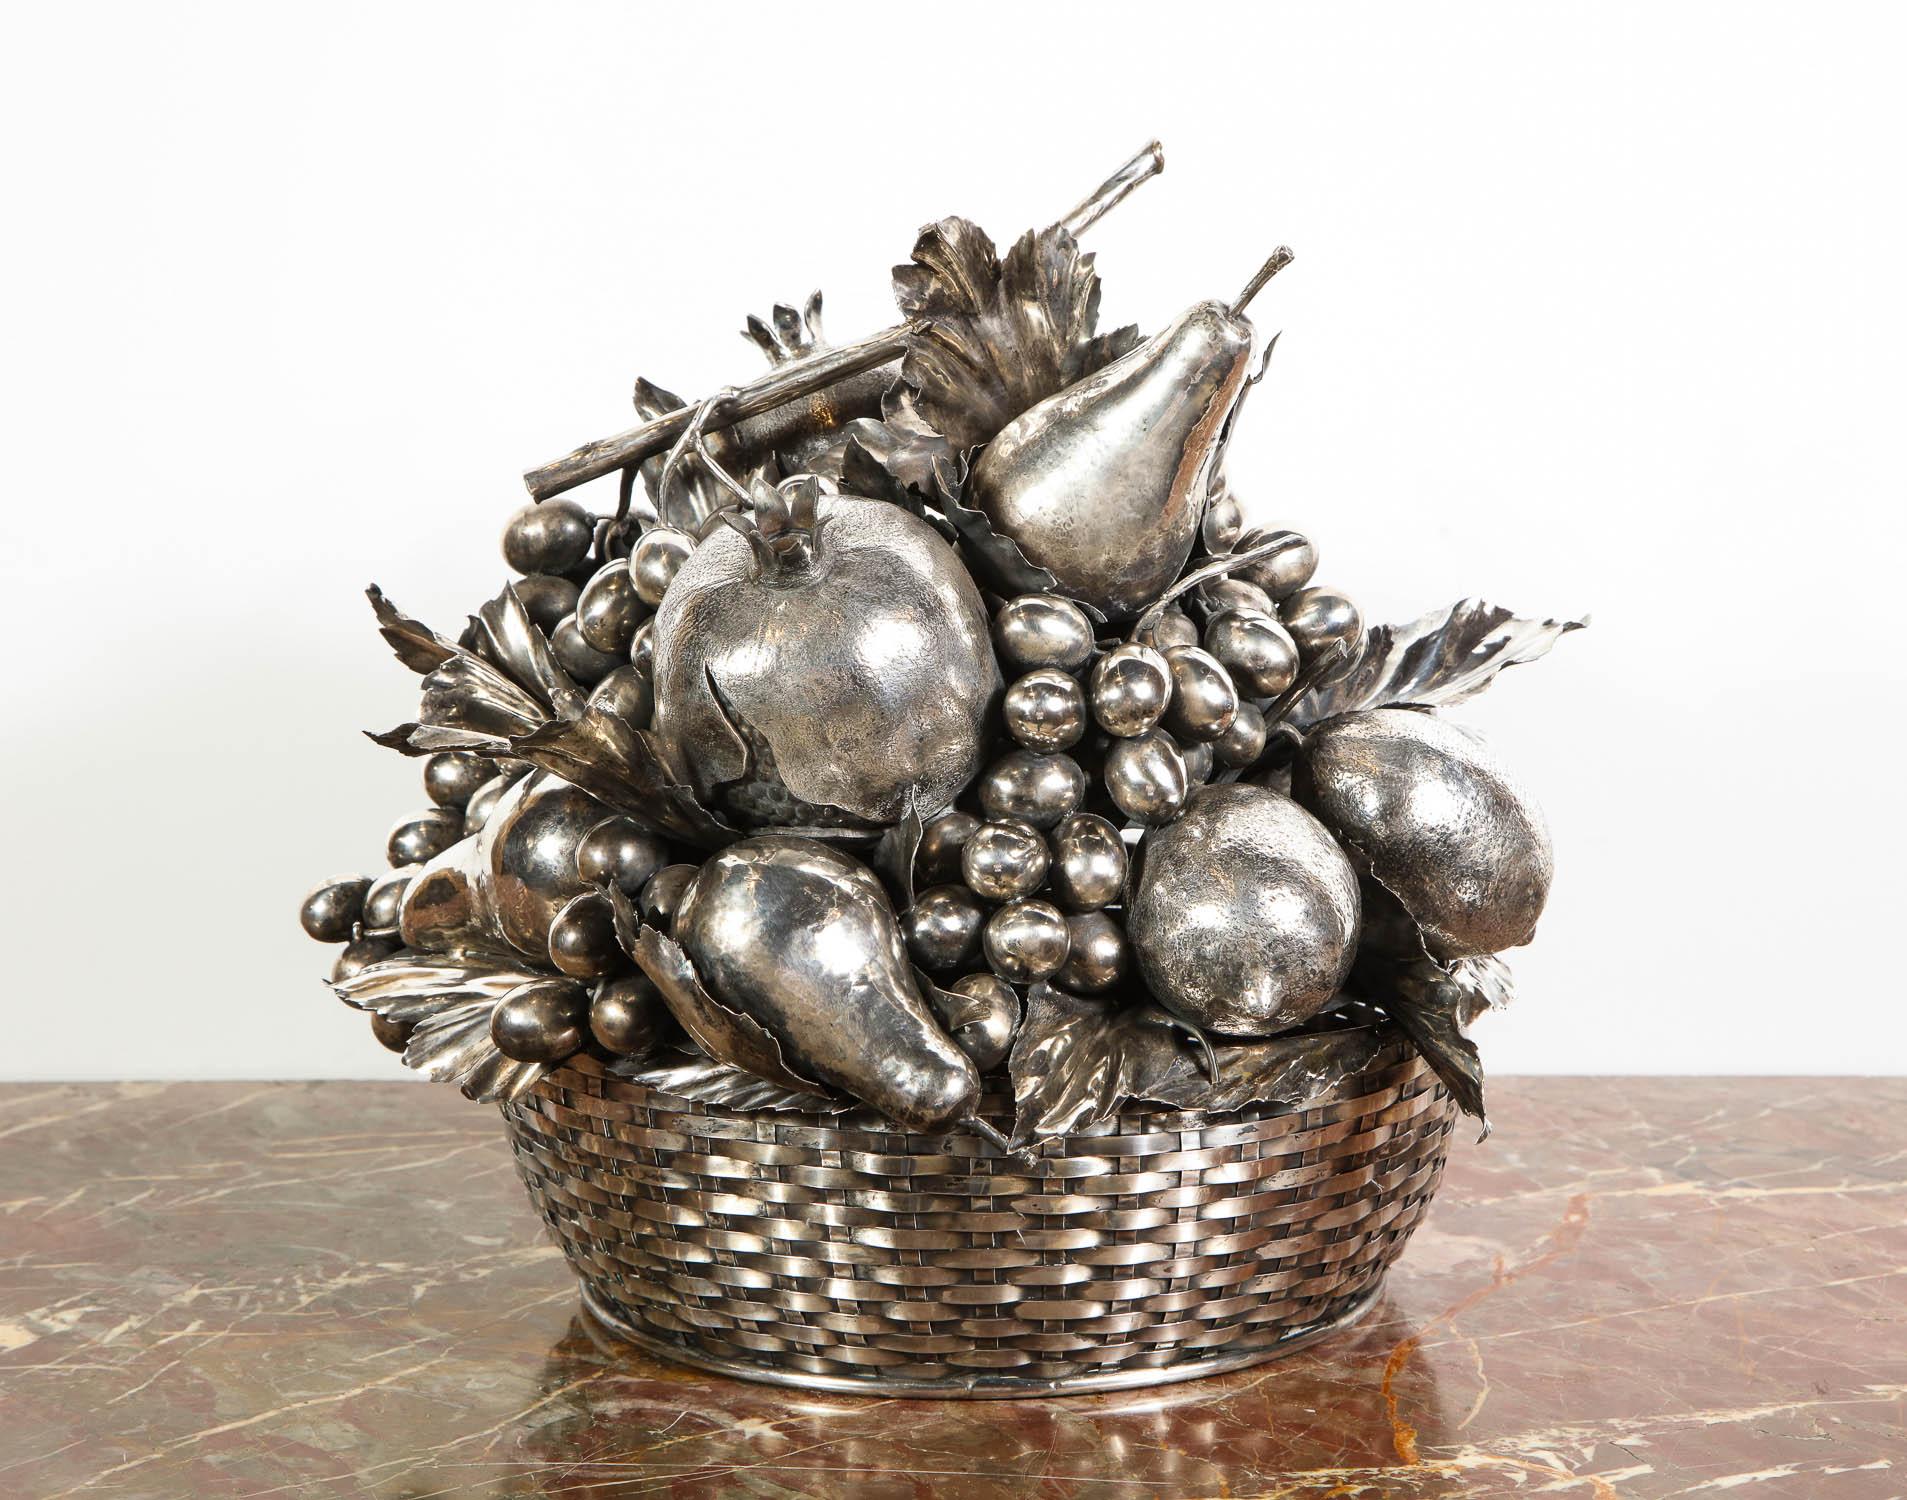 Mario Buccellati, a large Italian silver fruit basket centerpiece

The woven sterling silver basket, topped by a removable textured and sculpted sterling silver arrangement of fruits (pomegranates, pears, grapes, lemons, and leaves).

The grape